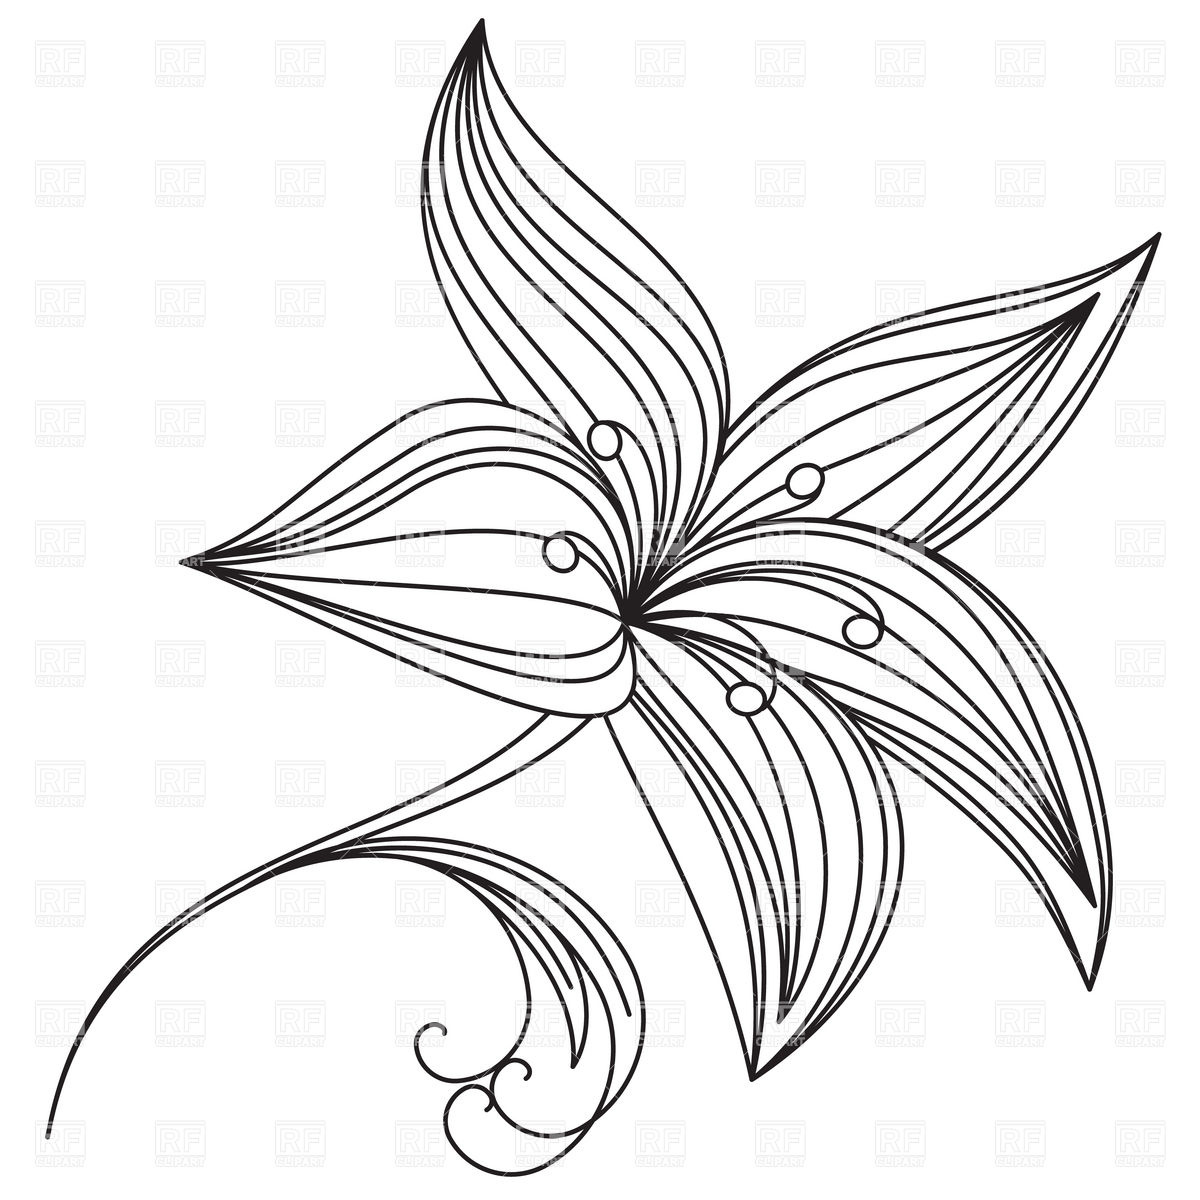 19 Photos of Outline Flower Vector